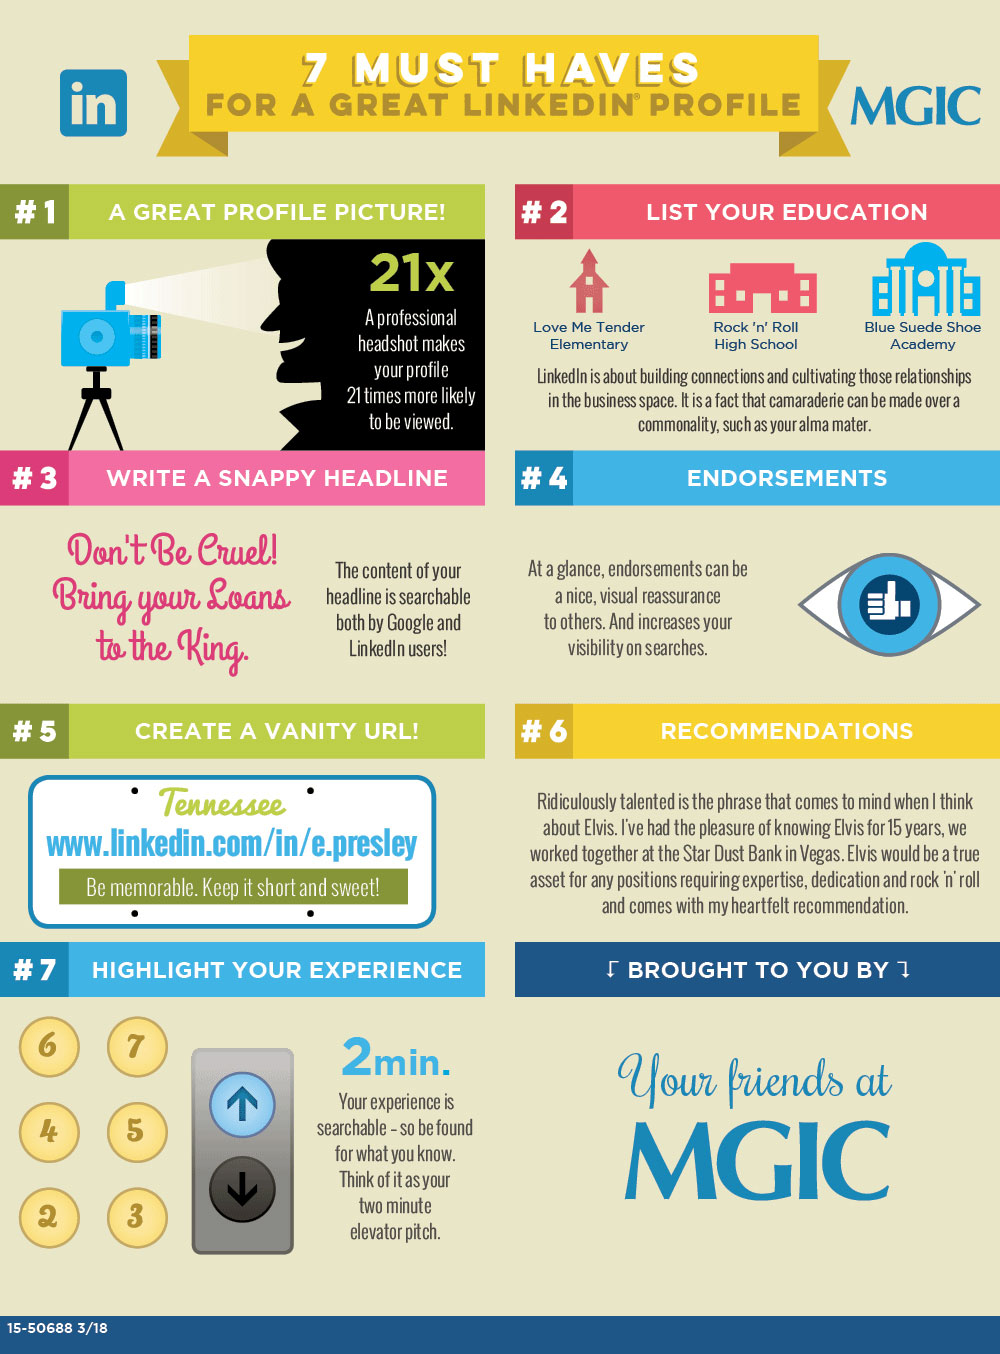 7-must-haves-for-a-great-linkedin-profile-infographic